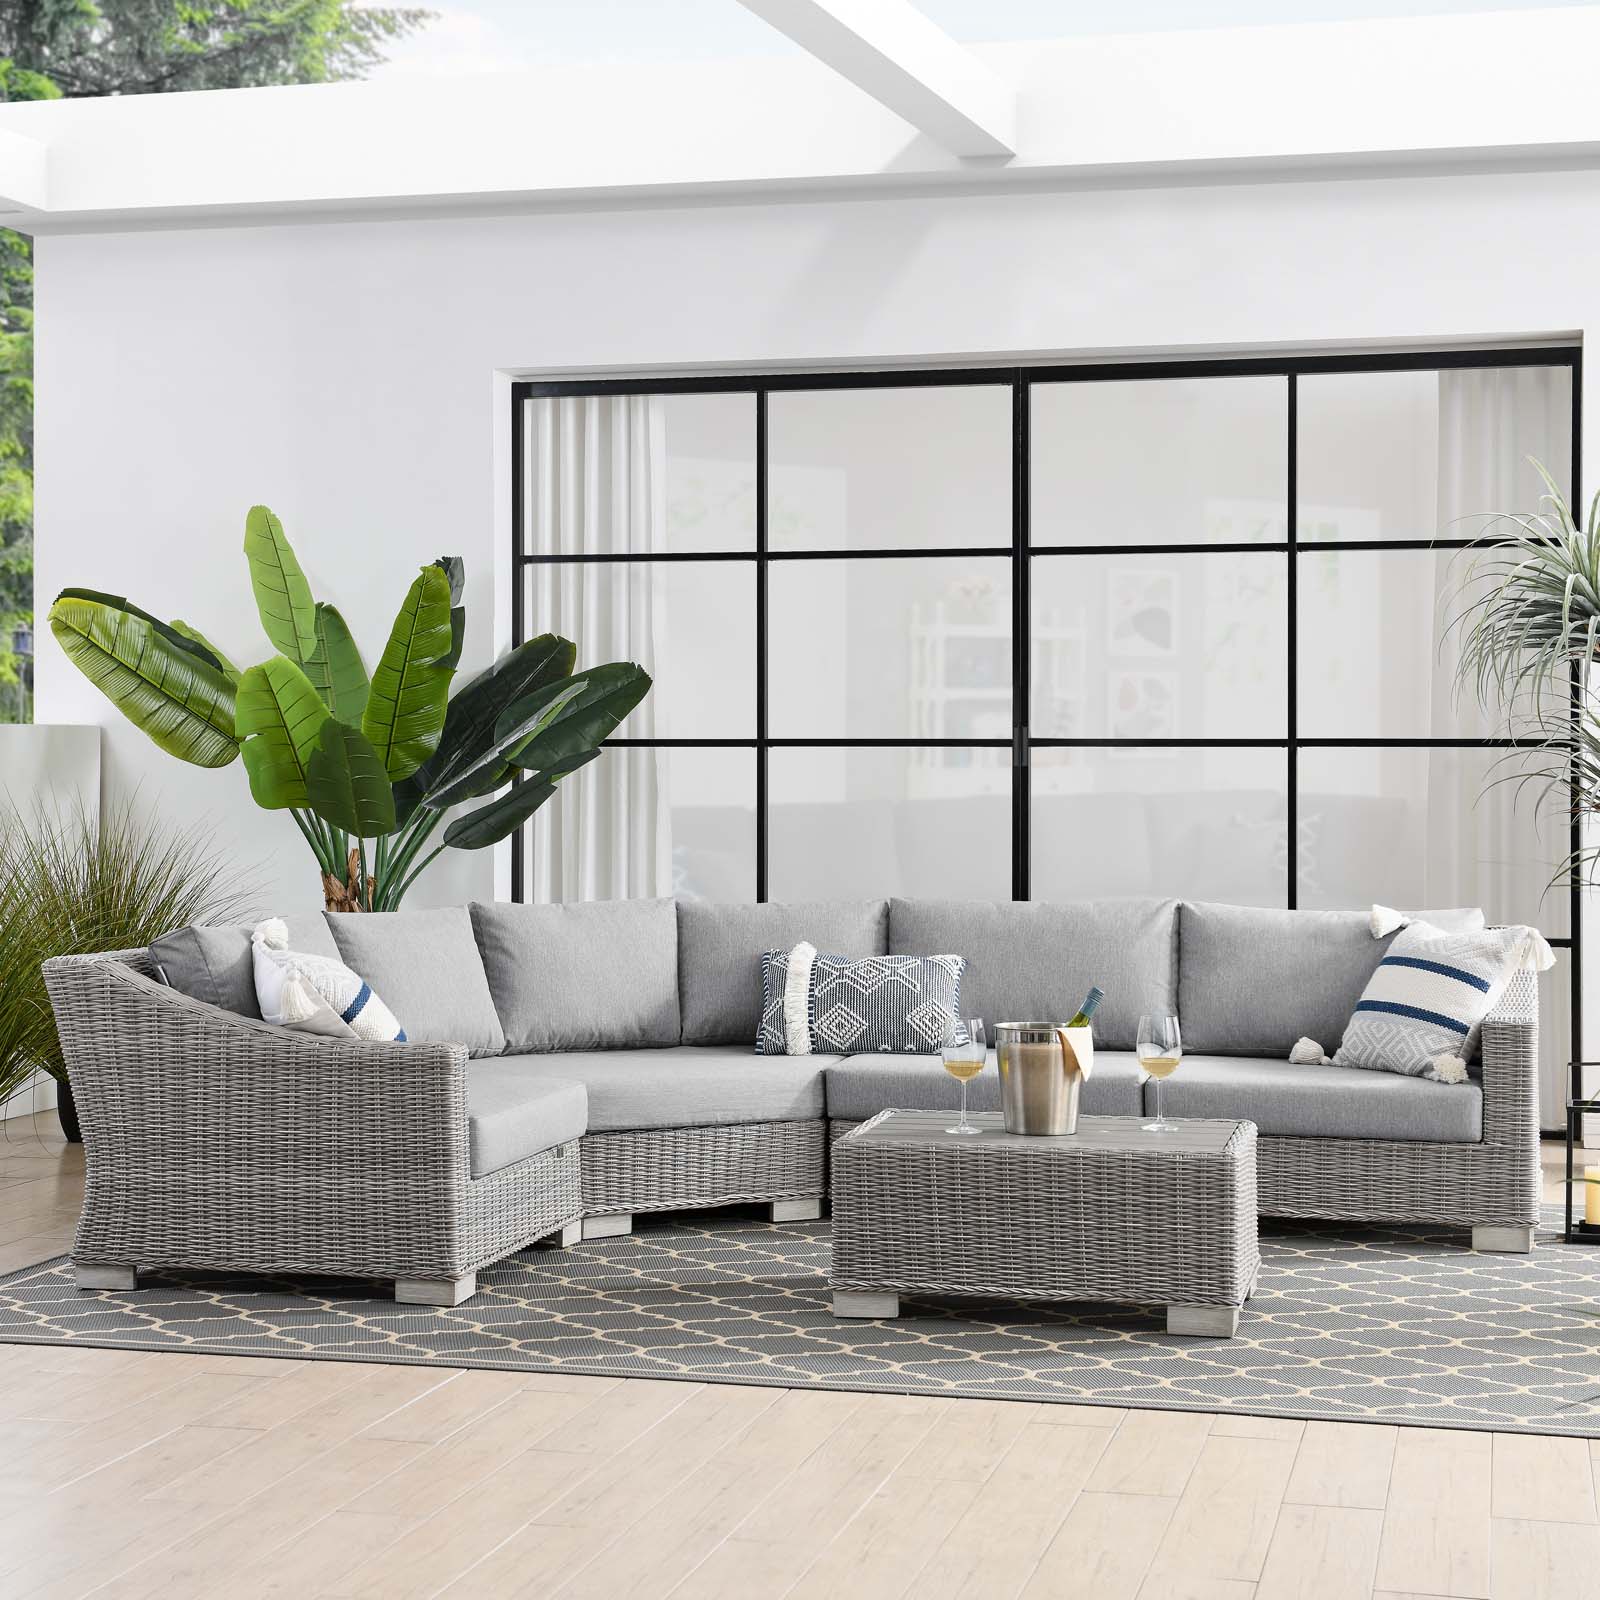 Lounge Sectional Sofa Chair Table Set, Rattan, Wicker, Grey Gray, Modern Contemporary Urban Design, Outdoor Patio Balcony Cafe Bistro Garden Furniture Hotel Hospitality - image 2 of 10